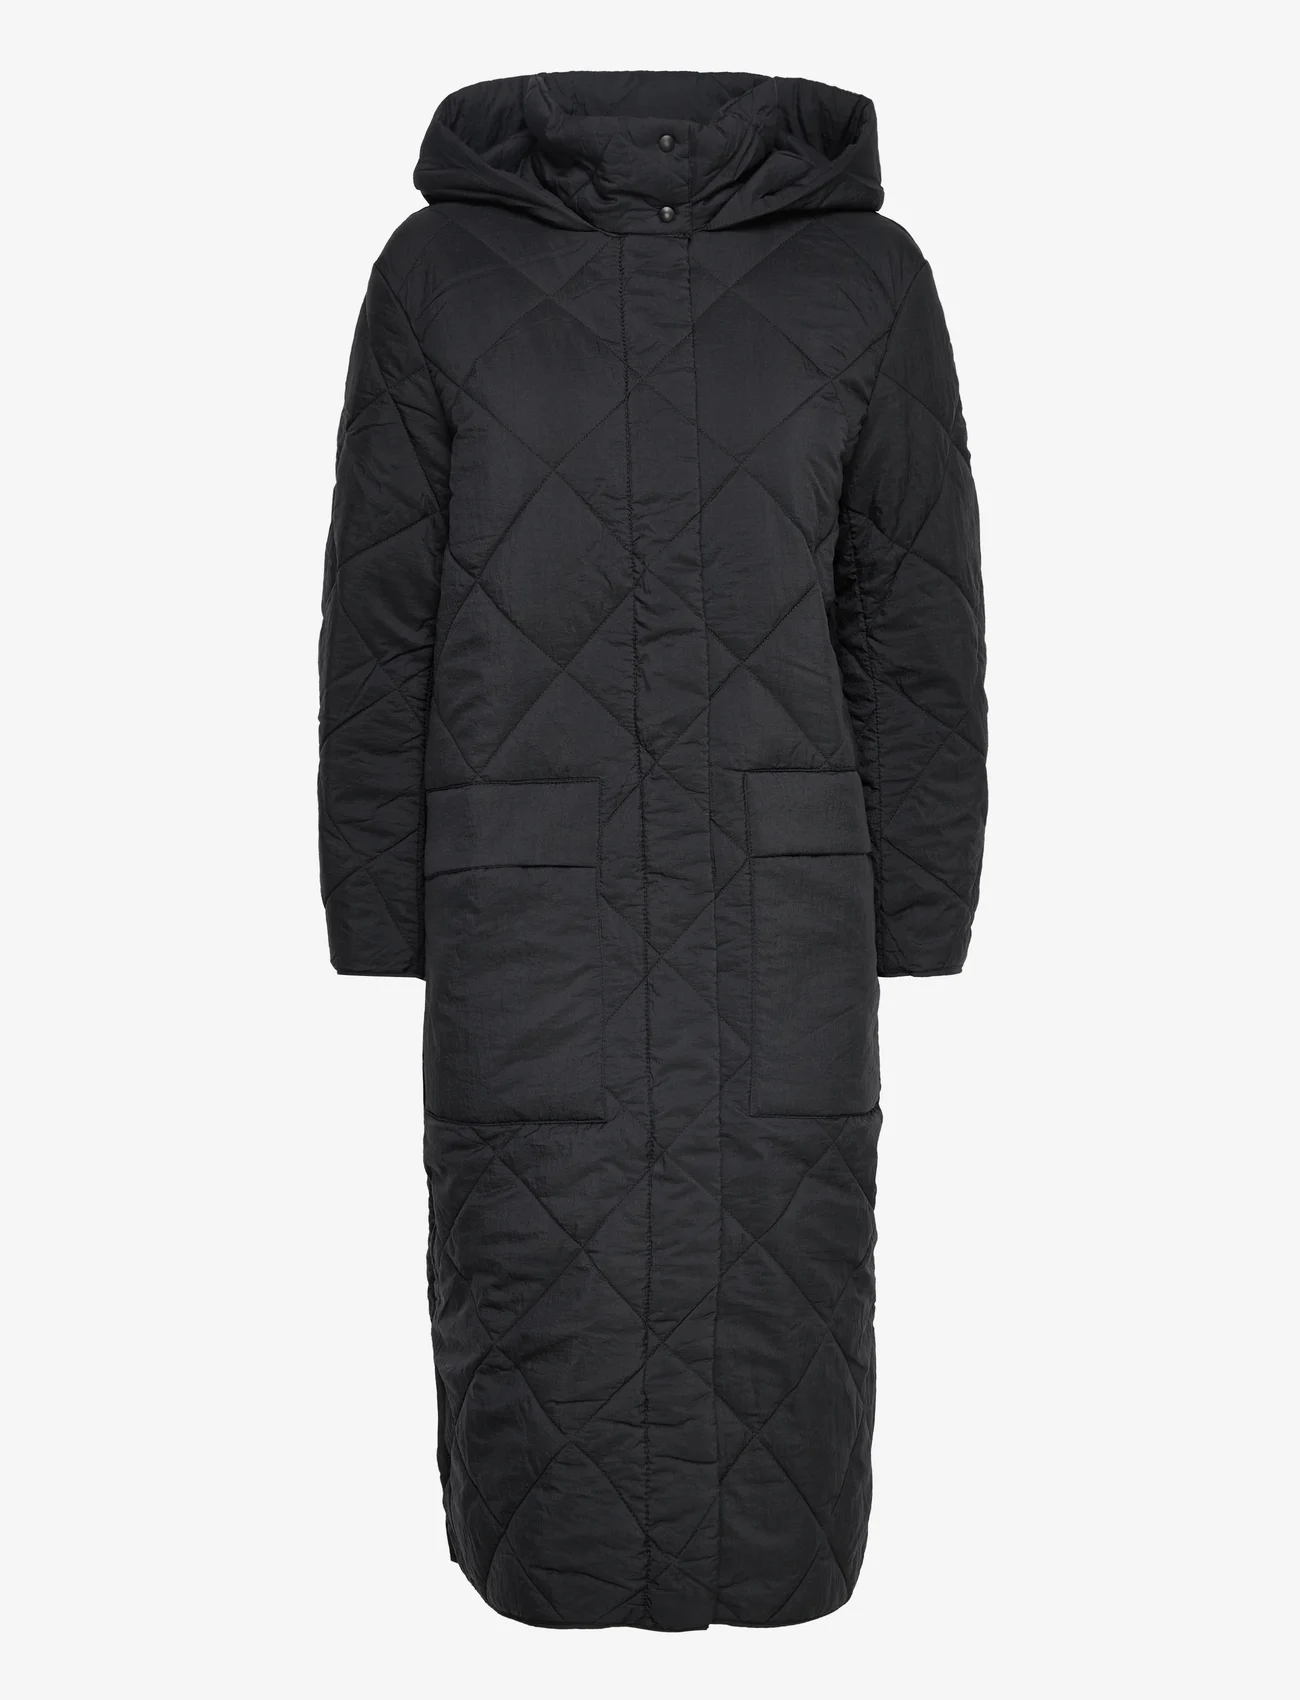 Esprit Casual - Long quilted coat with hood - wiosenne kurtki - black - 0